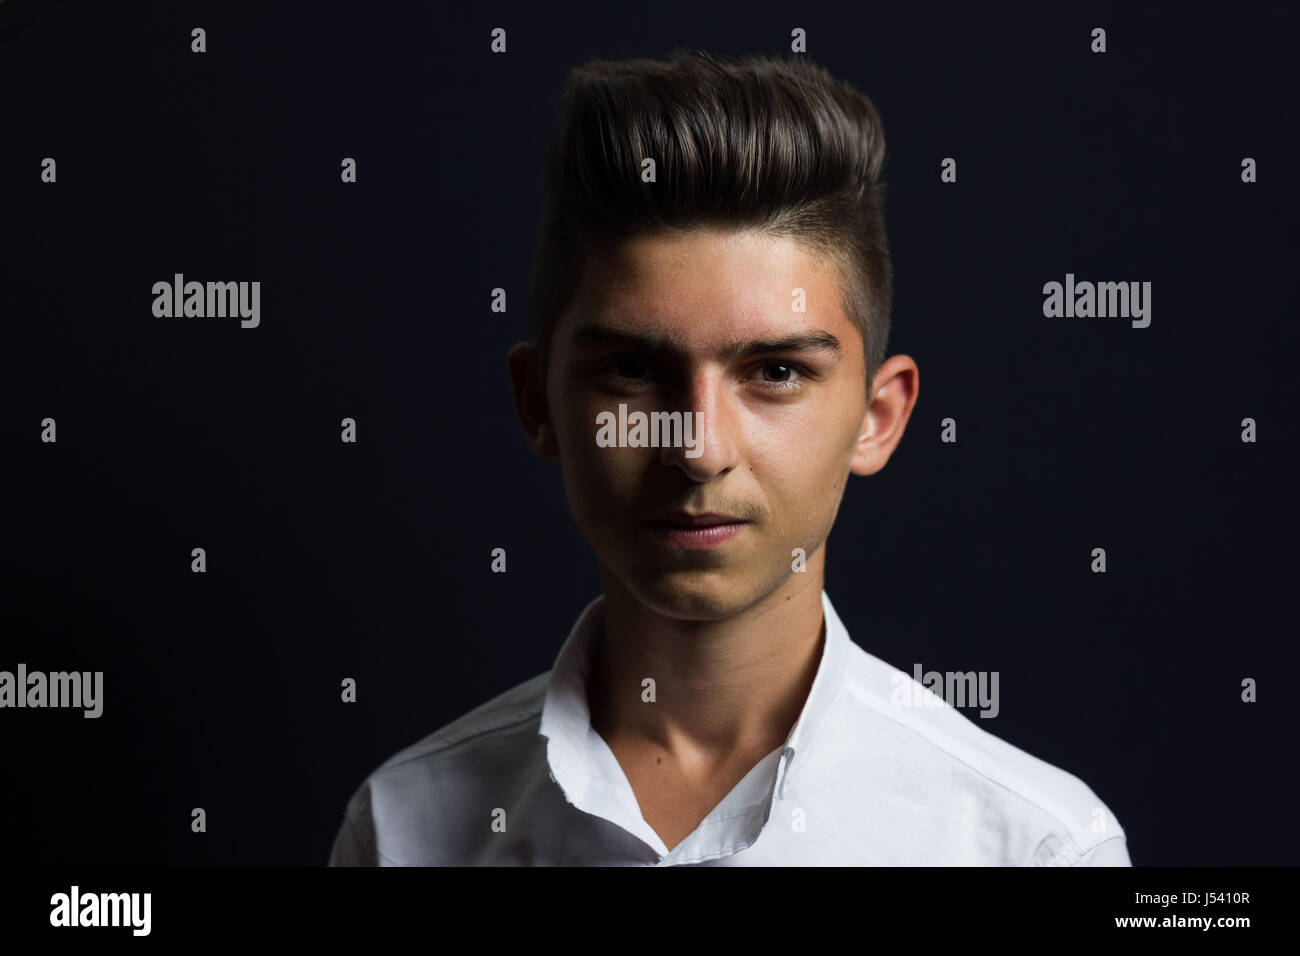 young cute serious teen with stylish haircut Stock Photo - Alamy